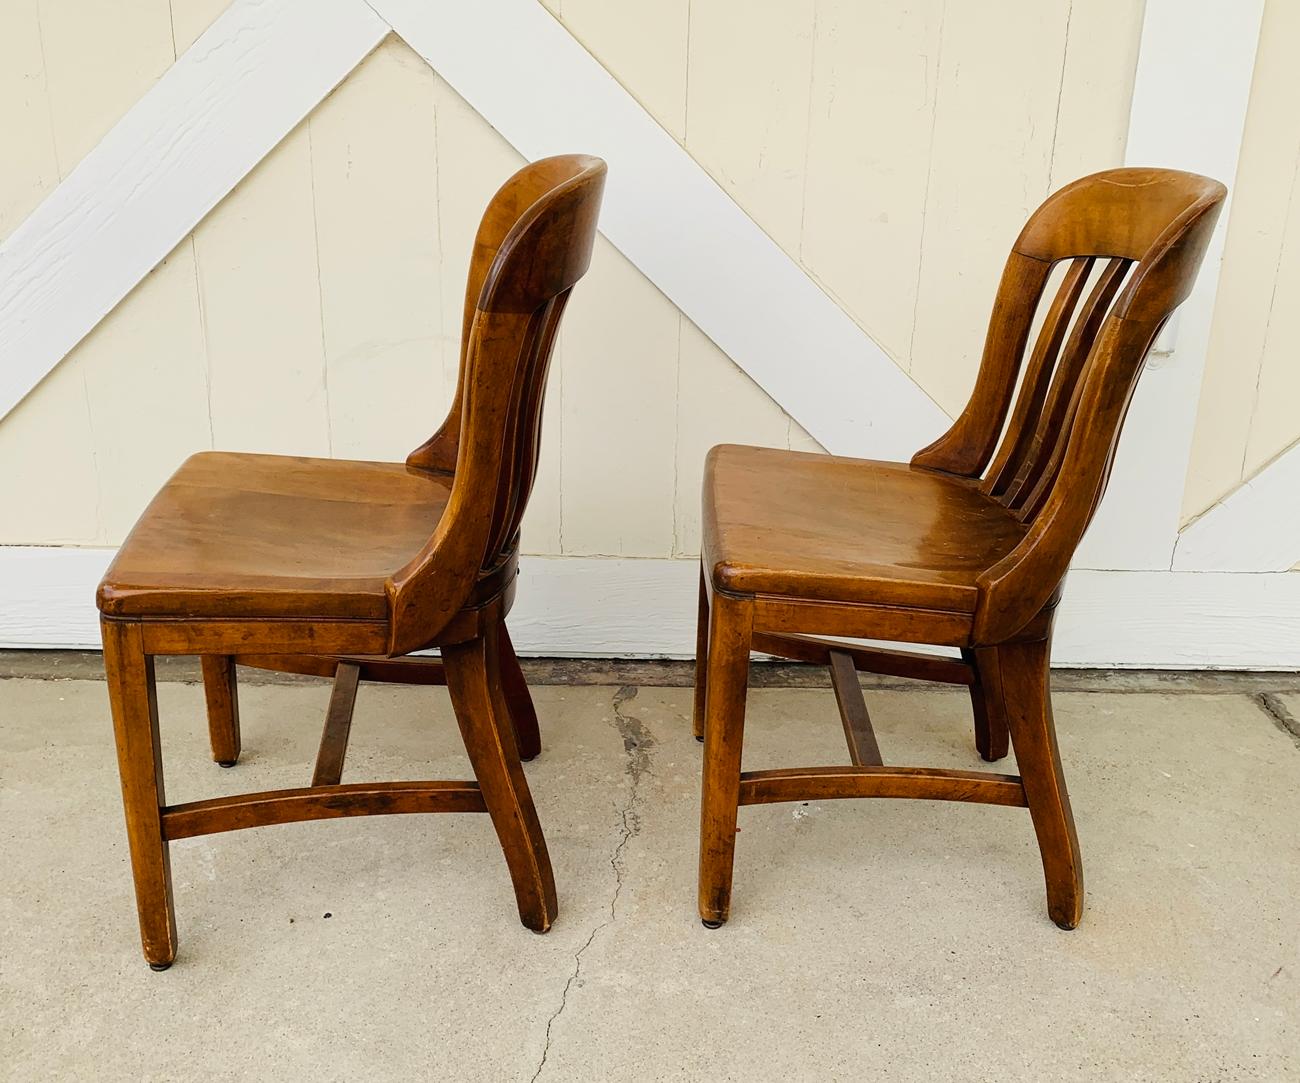 American Pair of Vintage Bankers Chairs by Sikes of Buffalo N.Y.